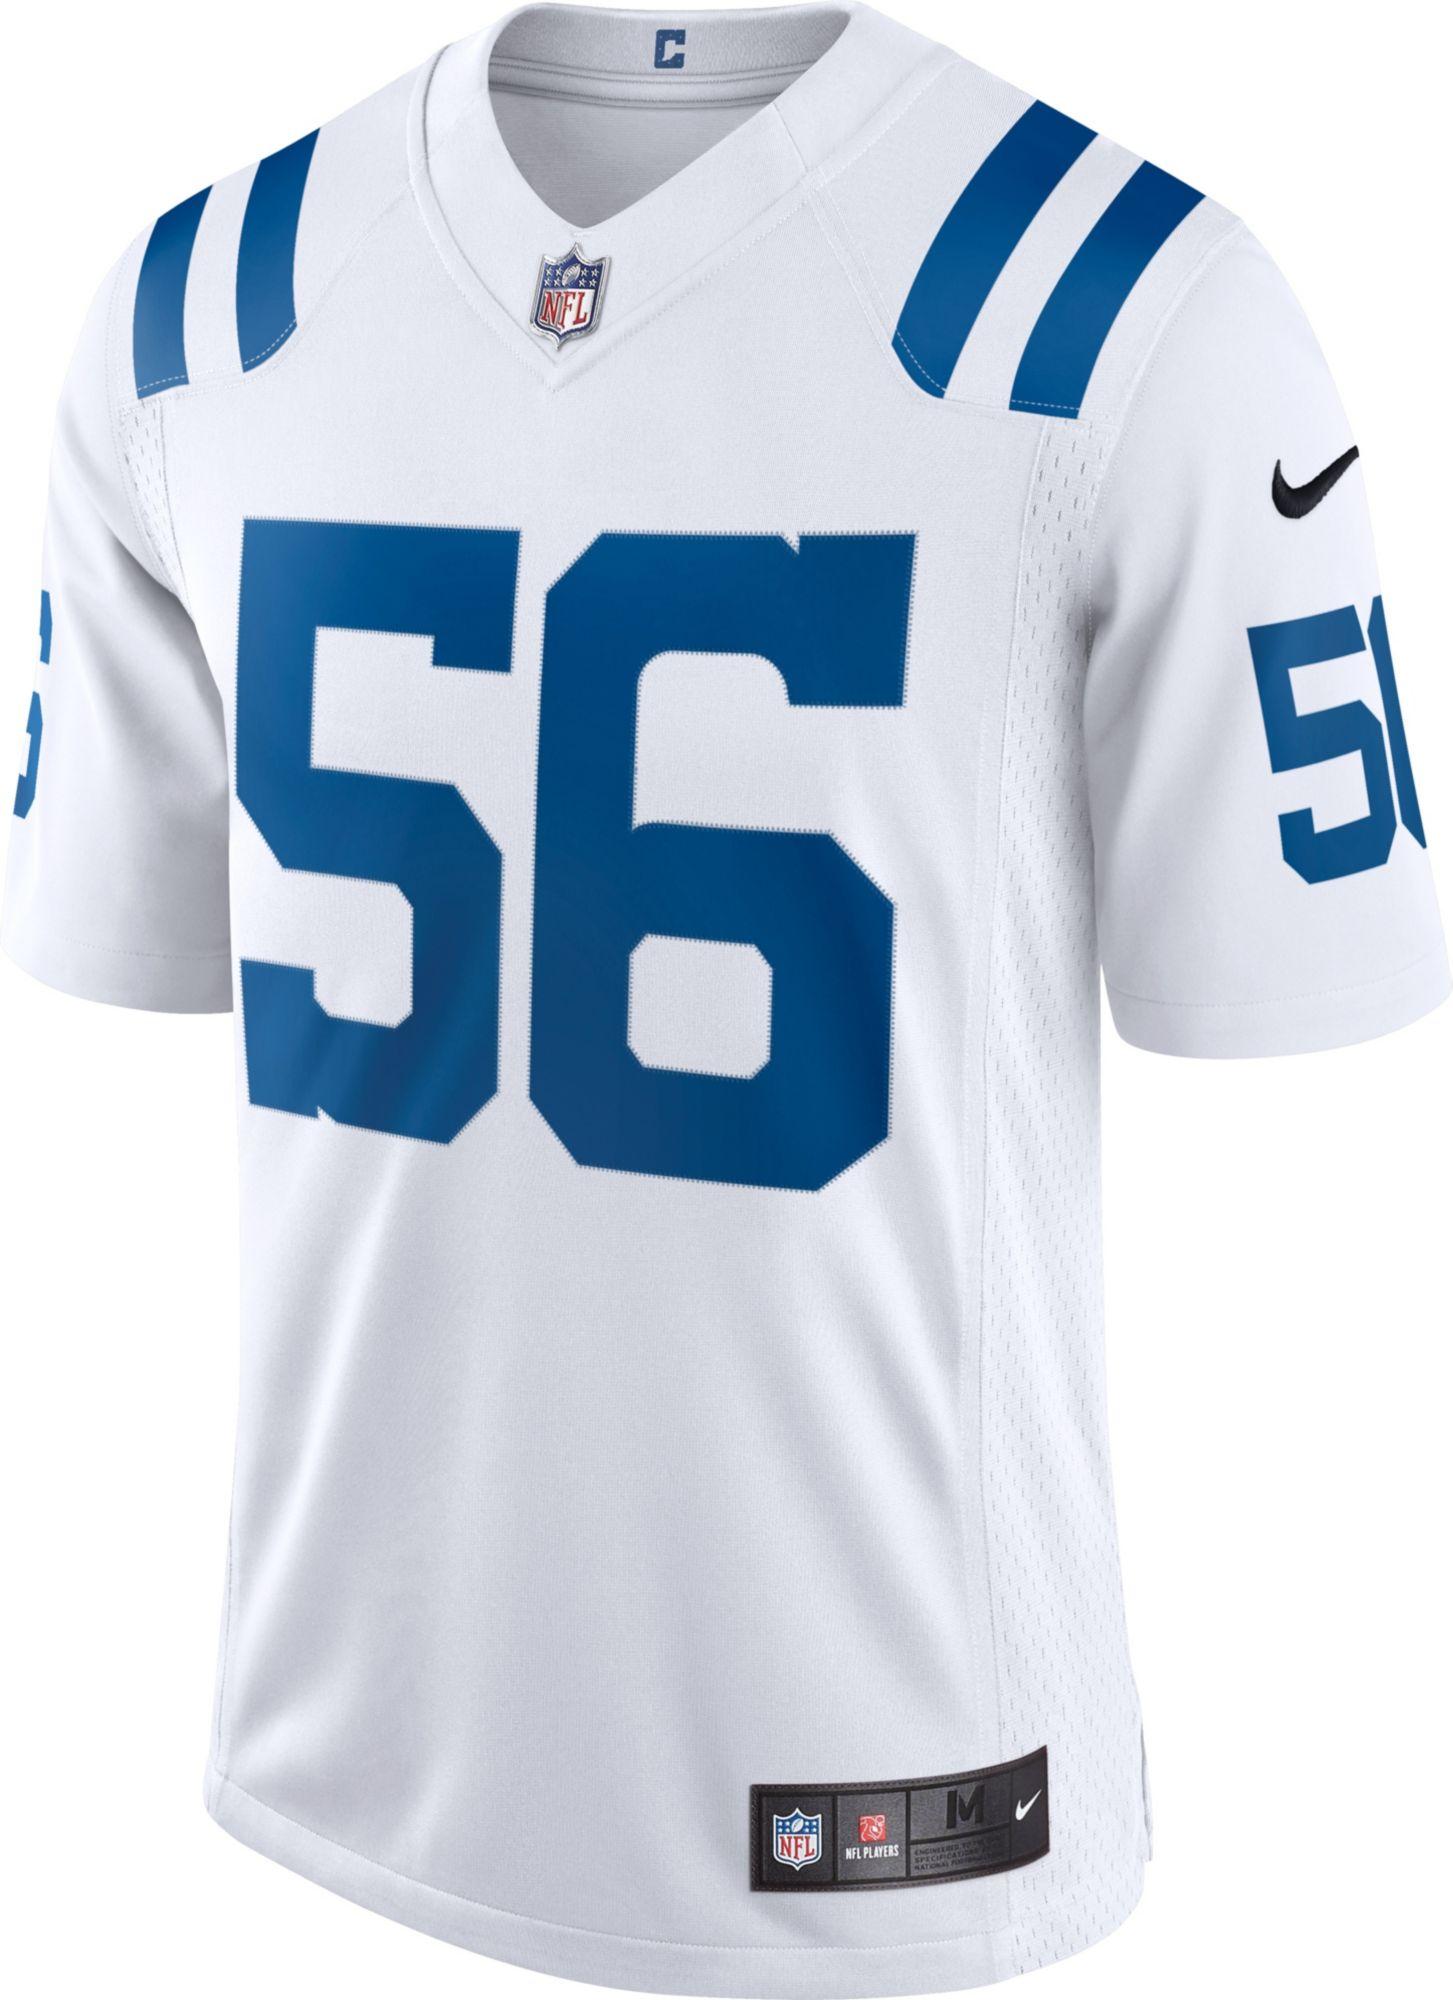 Nike Satin Away Limited Jersey Indianapolis Colts Quenton Nelson #56 in ...